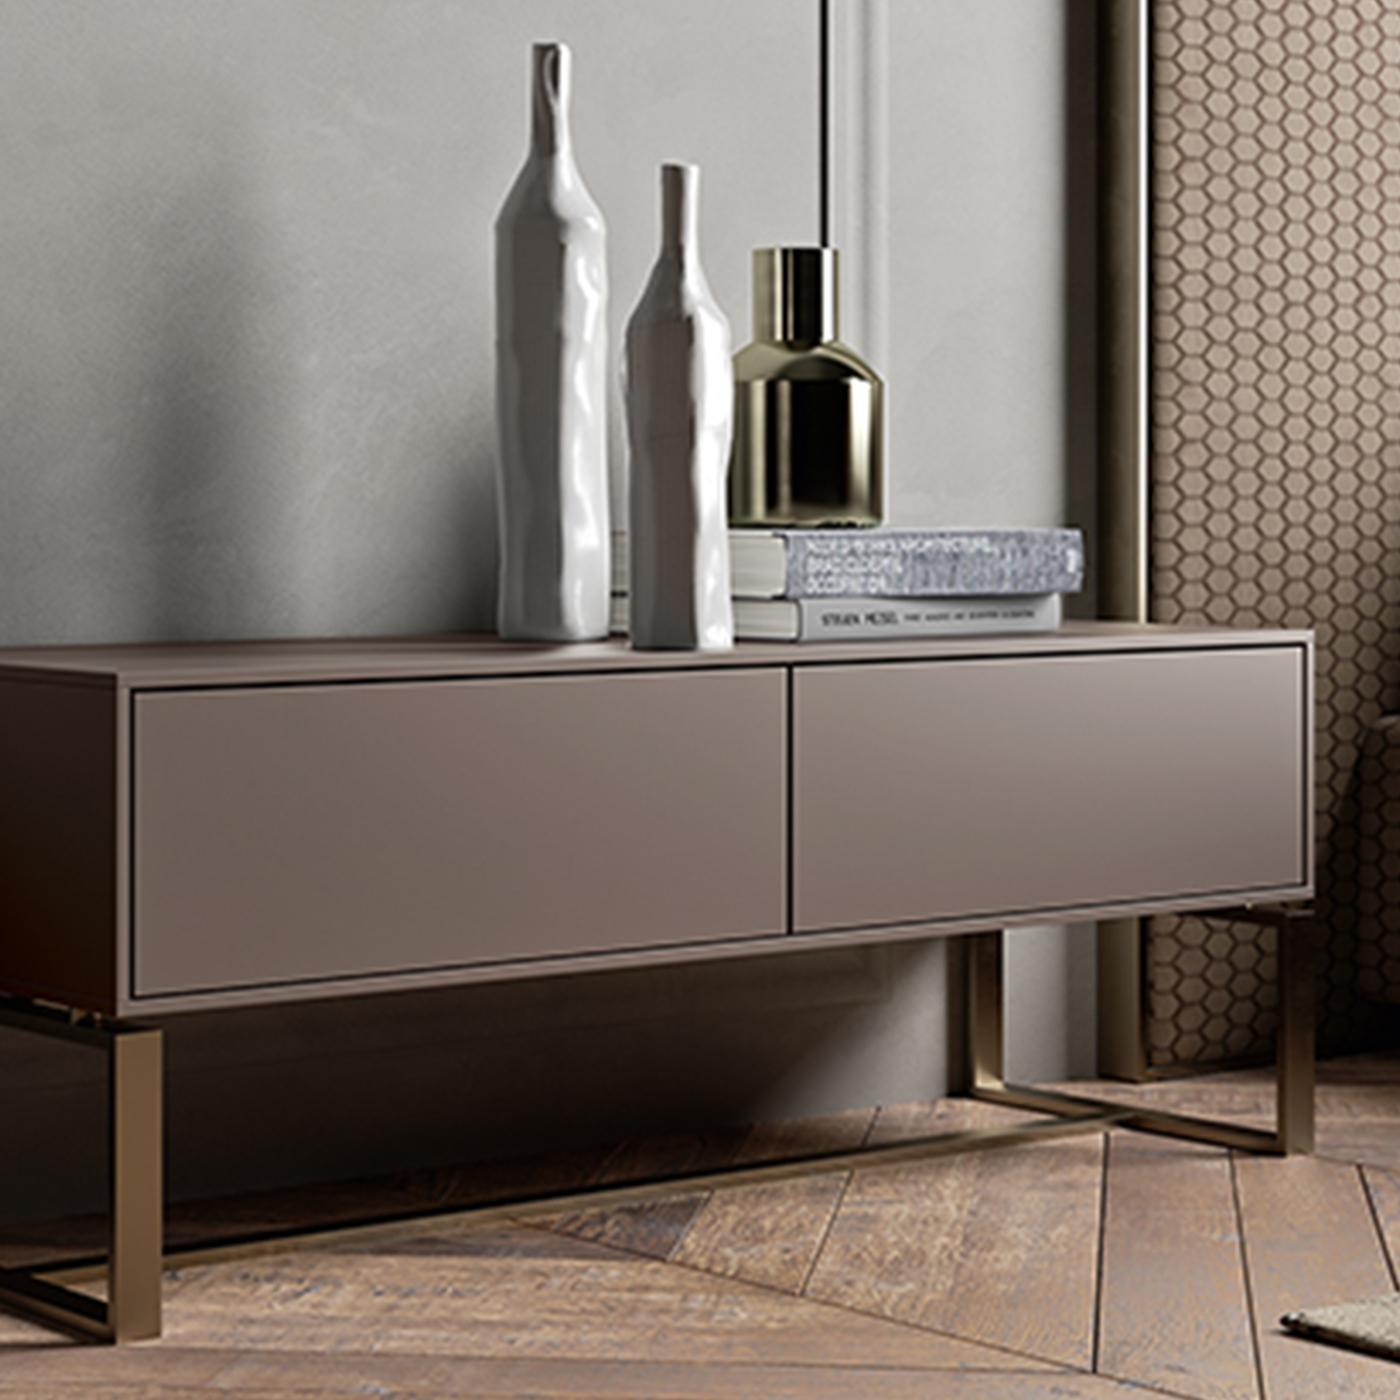 A stunning example of modern style, this refined nightstand features an elongated, sophisticated silhouette. The MDF frame lacquered in matte gray stands on a streamlined base in brass-finished steel comprised of rectangular profiles connected